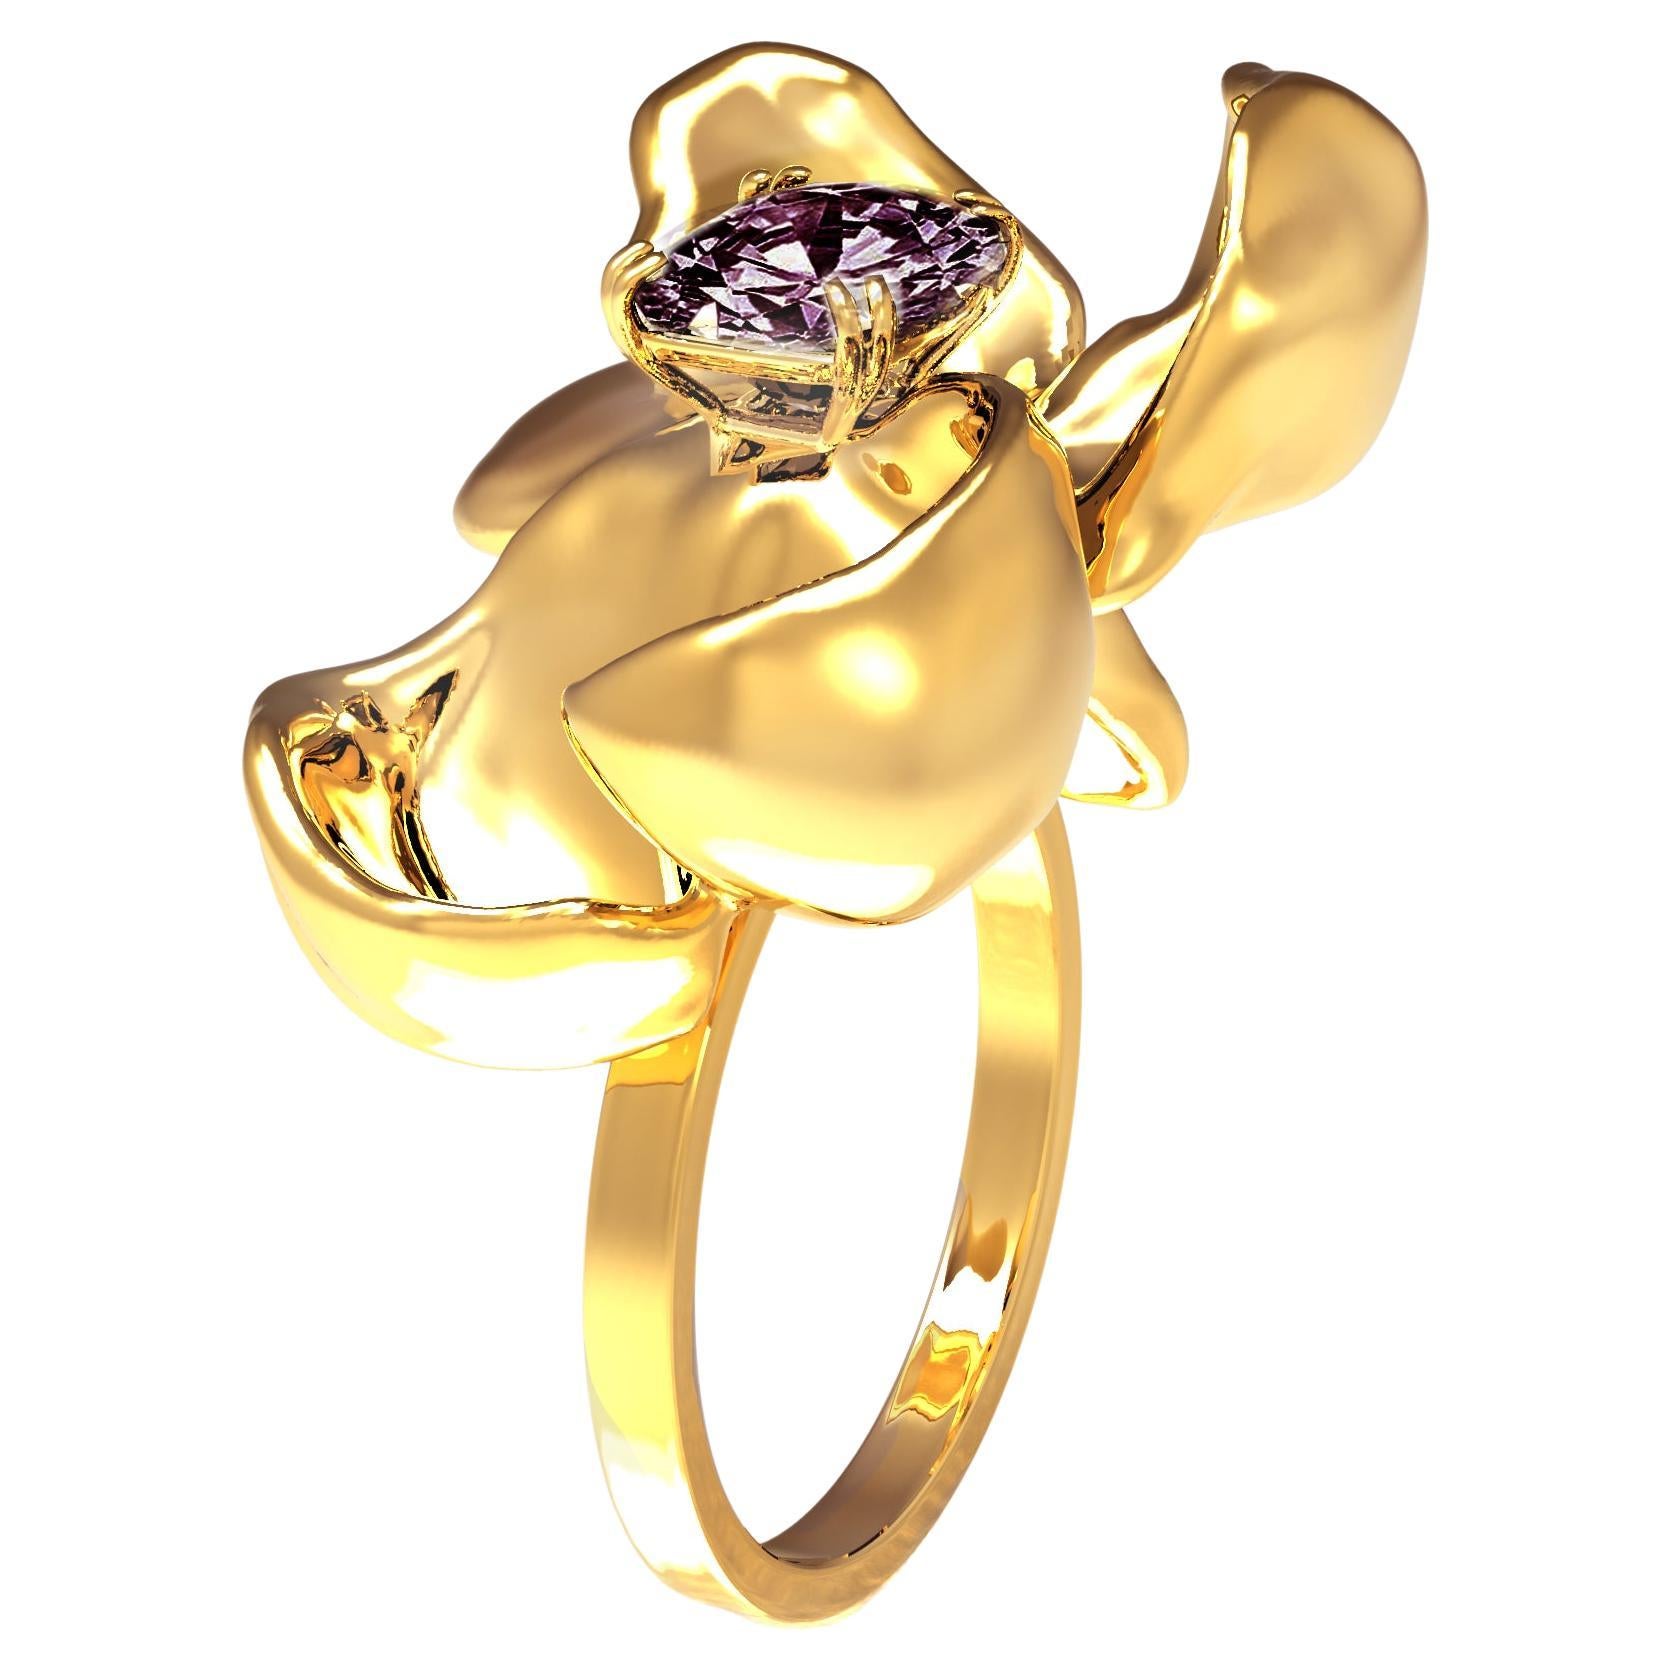 Eighteen Karat Yellow Gold Contemporary Cocktail Ring with Storm Purple Spinel